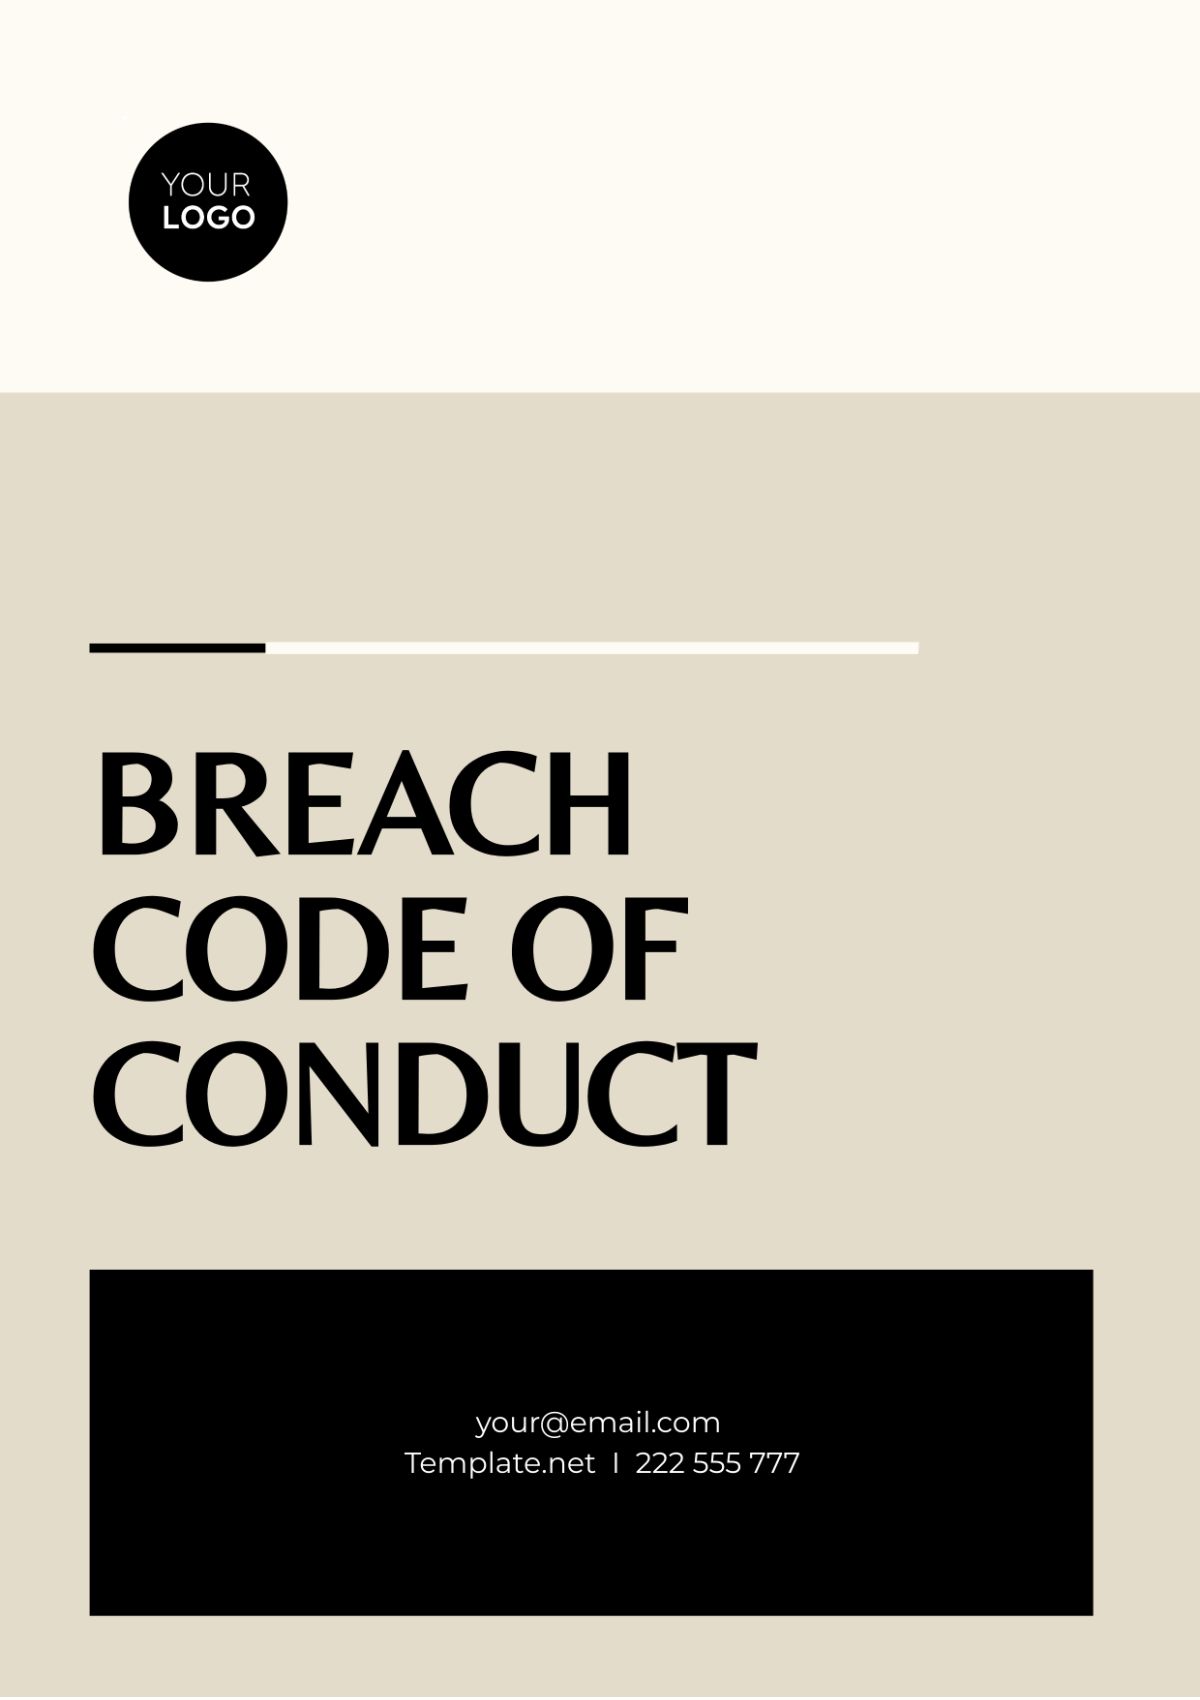 Breach Code of Conduct Template